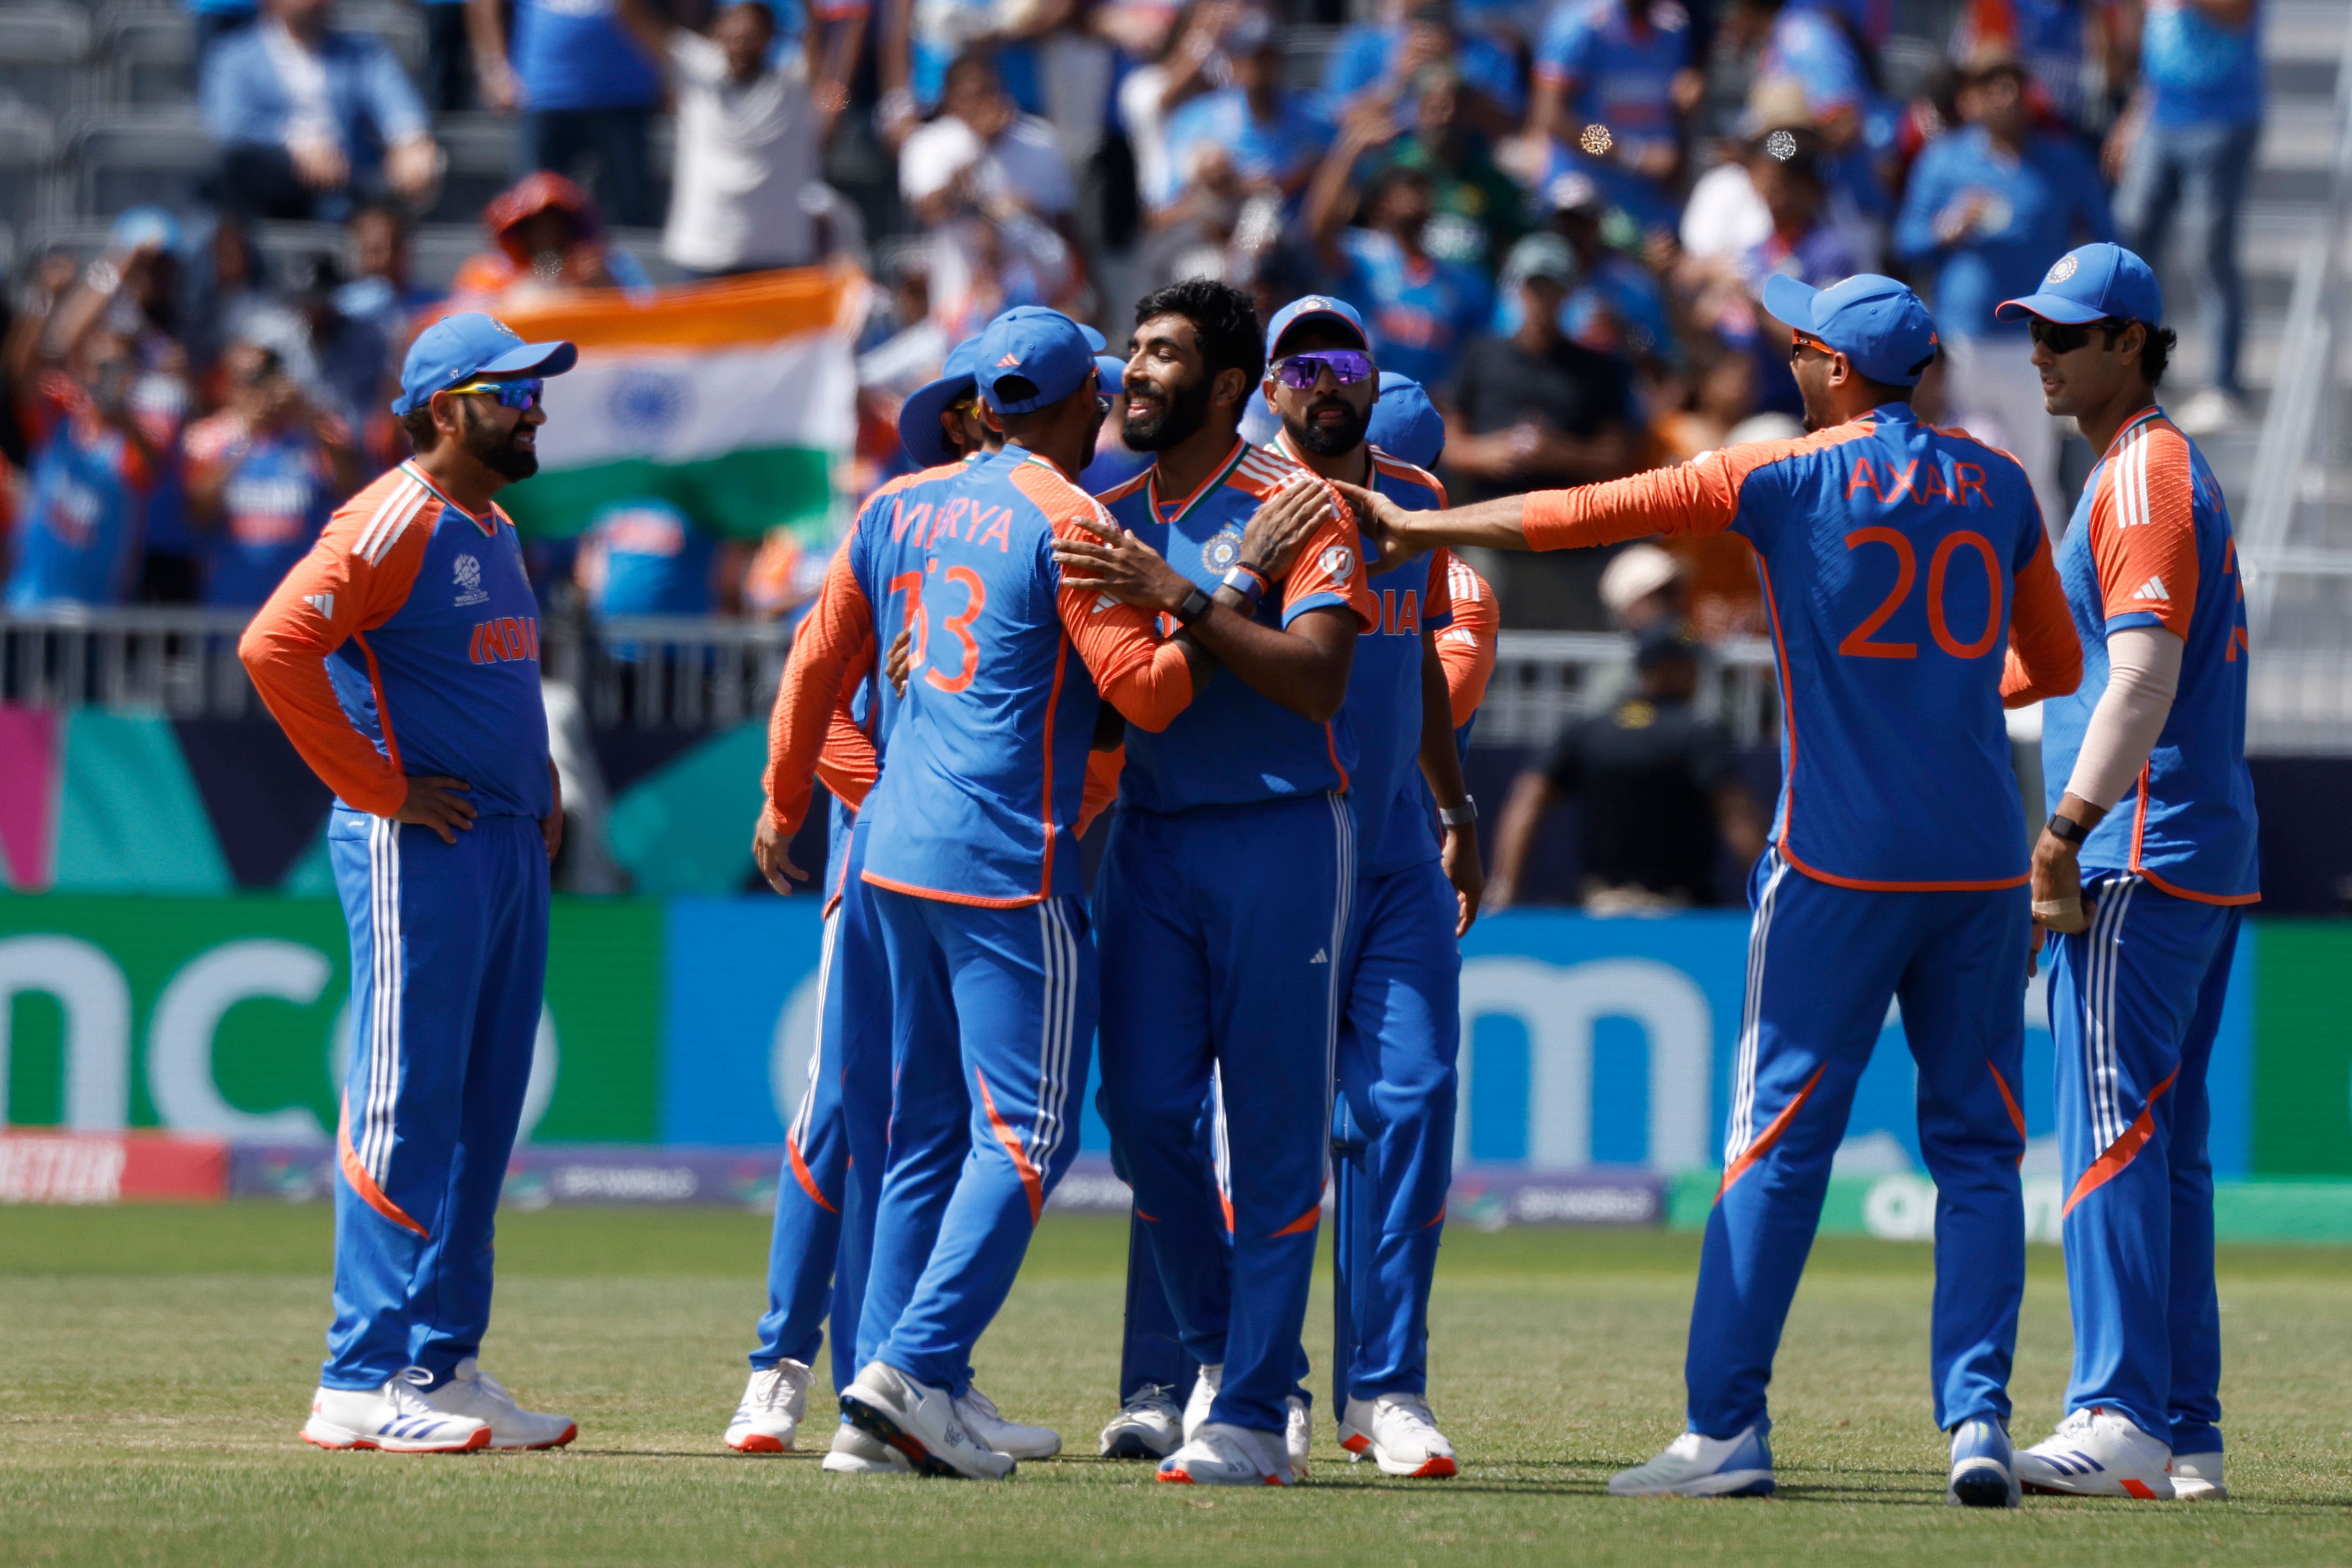 India are through to the T20 World Cup semi-finals